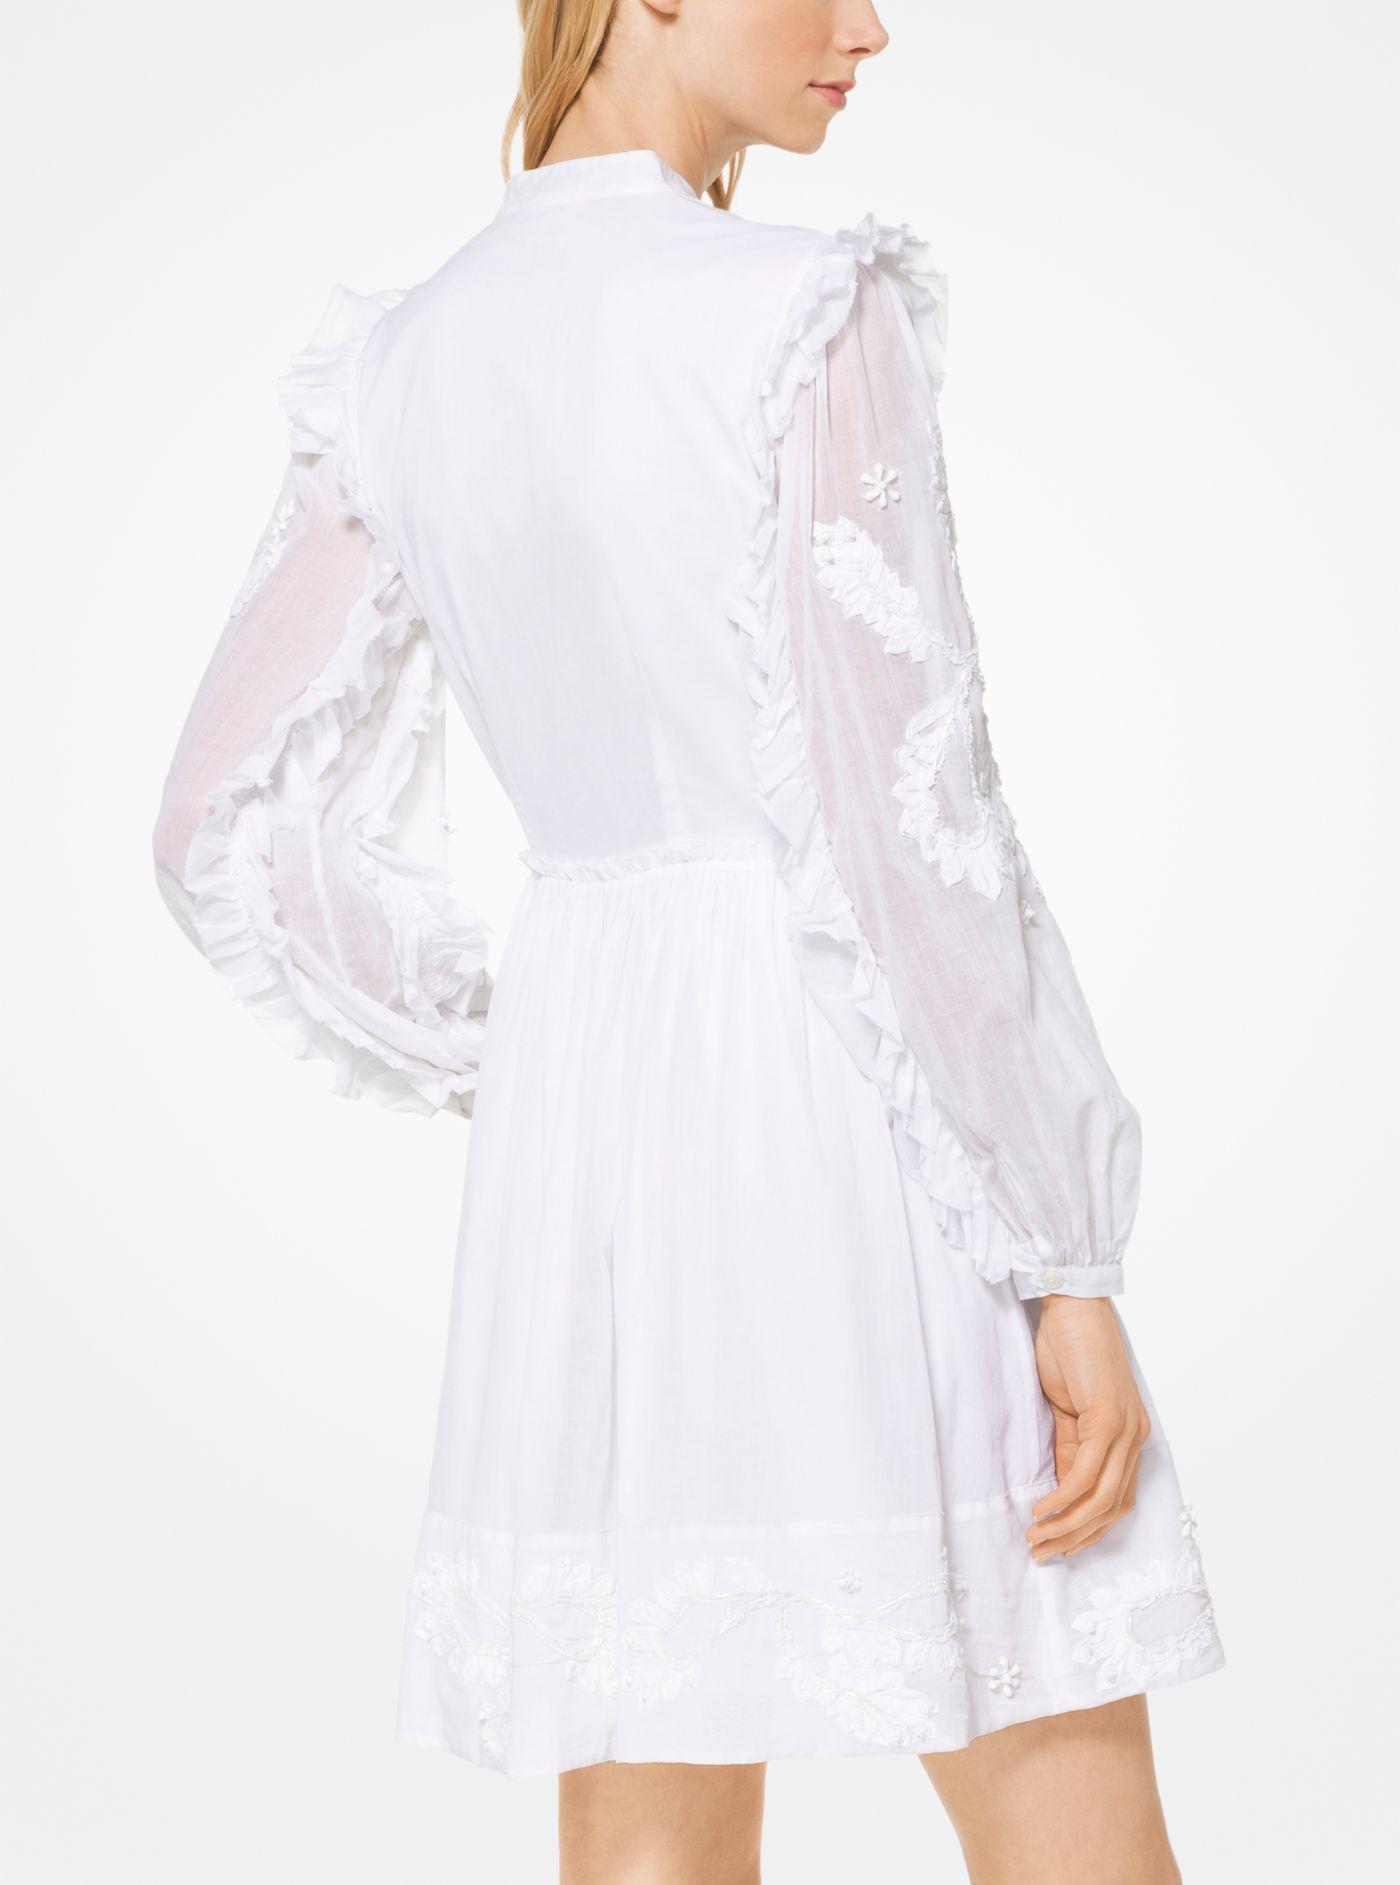 Michael Kors Embroidered Cotton Shirtdress in White - Lyst